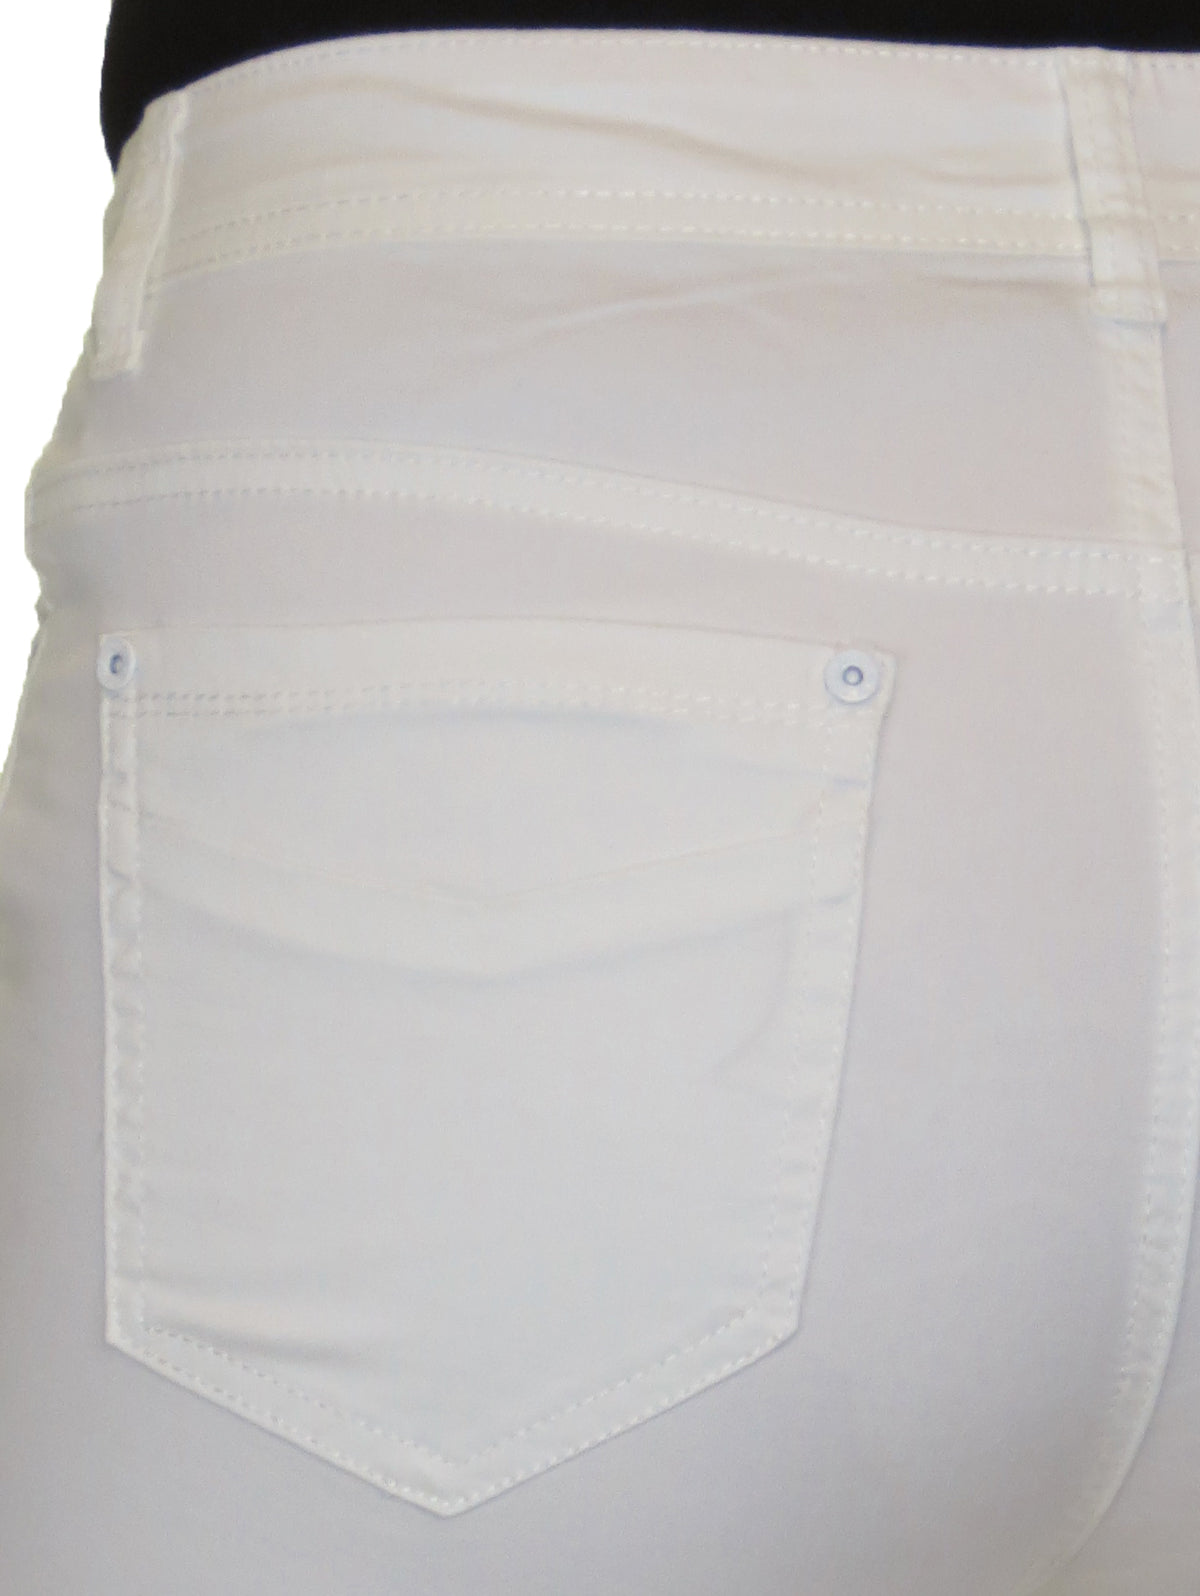 Stretch Chino Sheen Turn Up Cuff  Jeans Style Shorts White